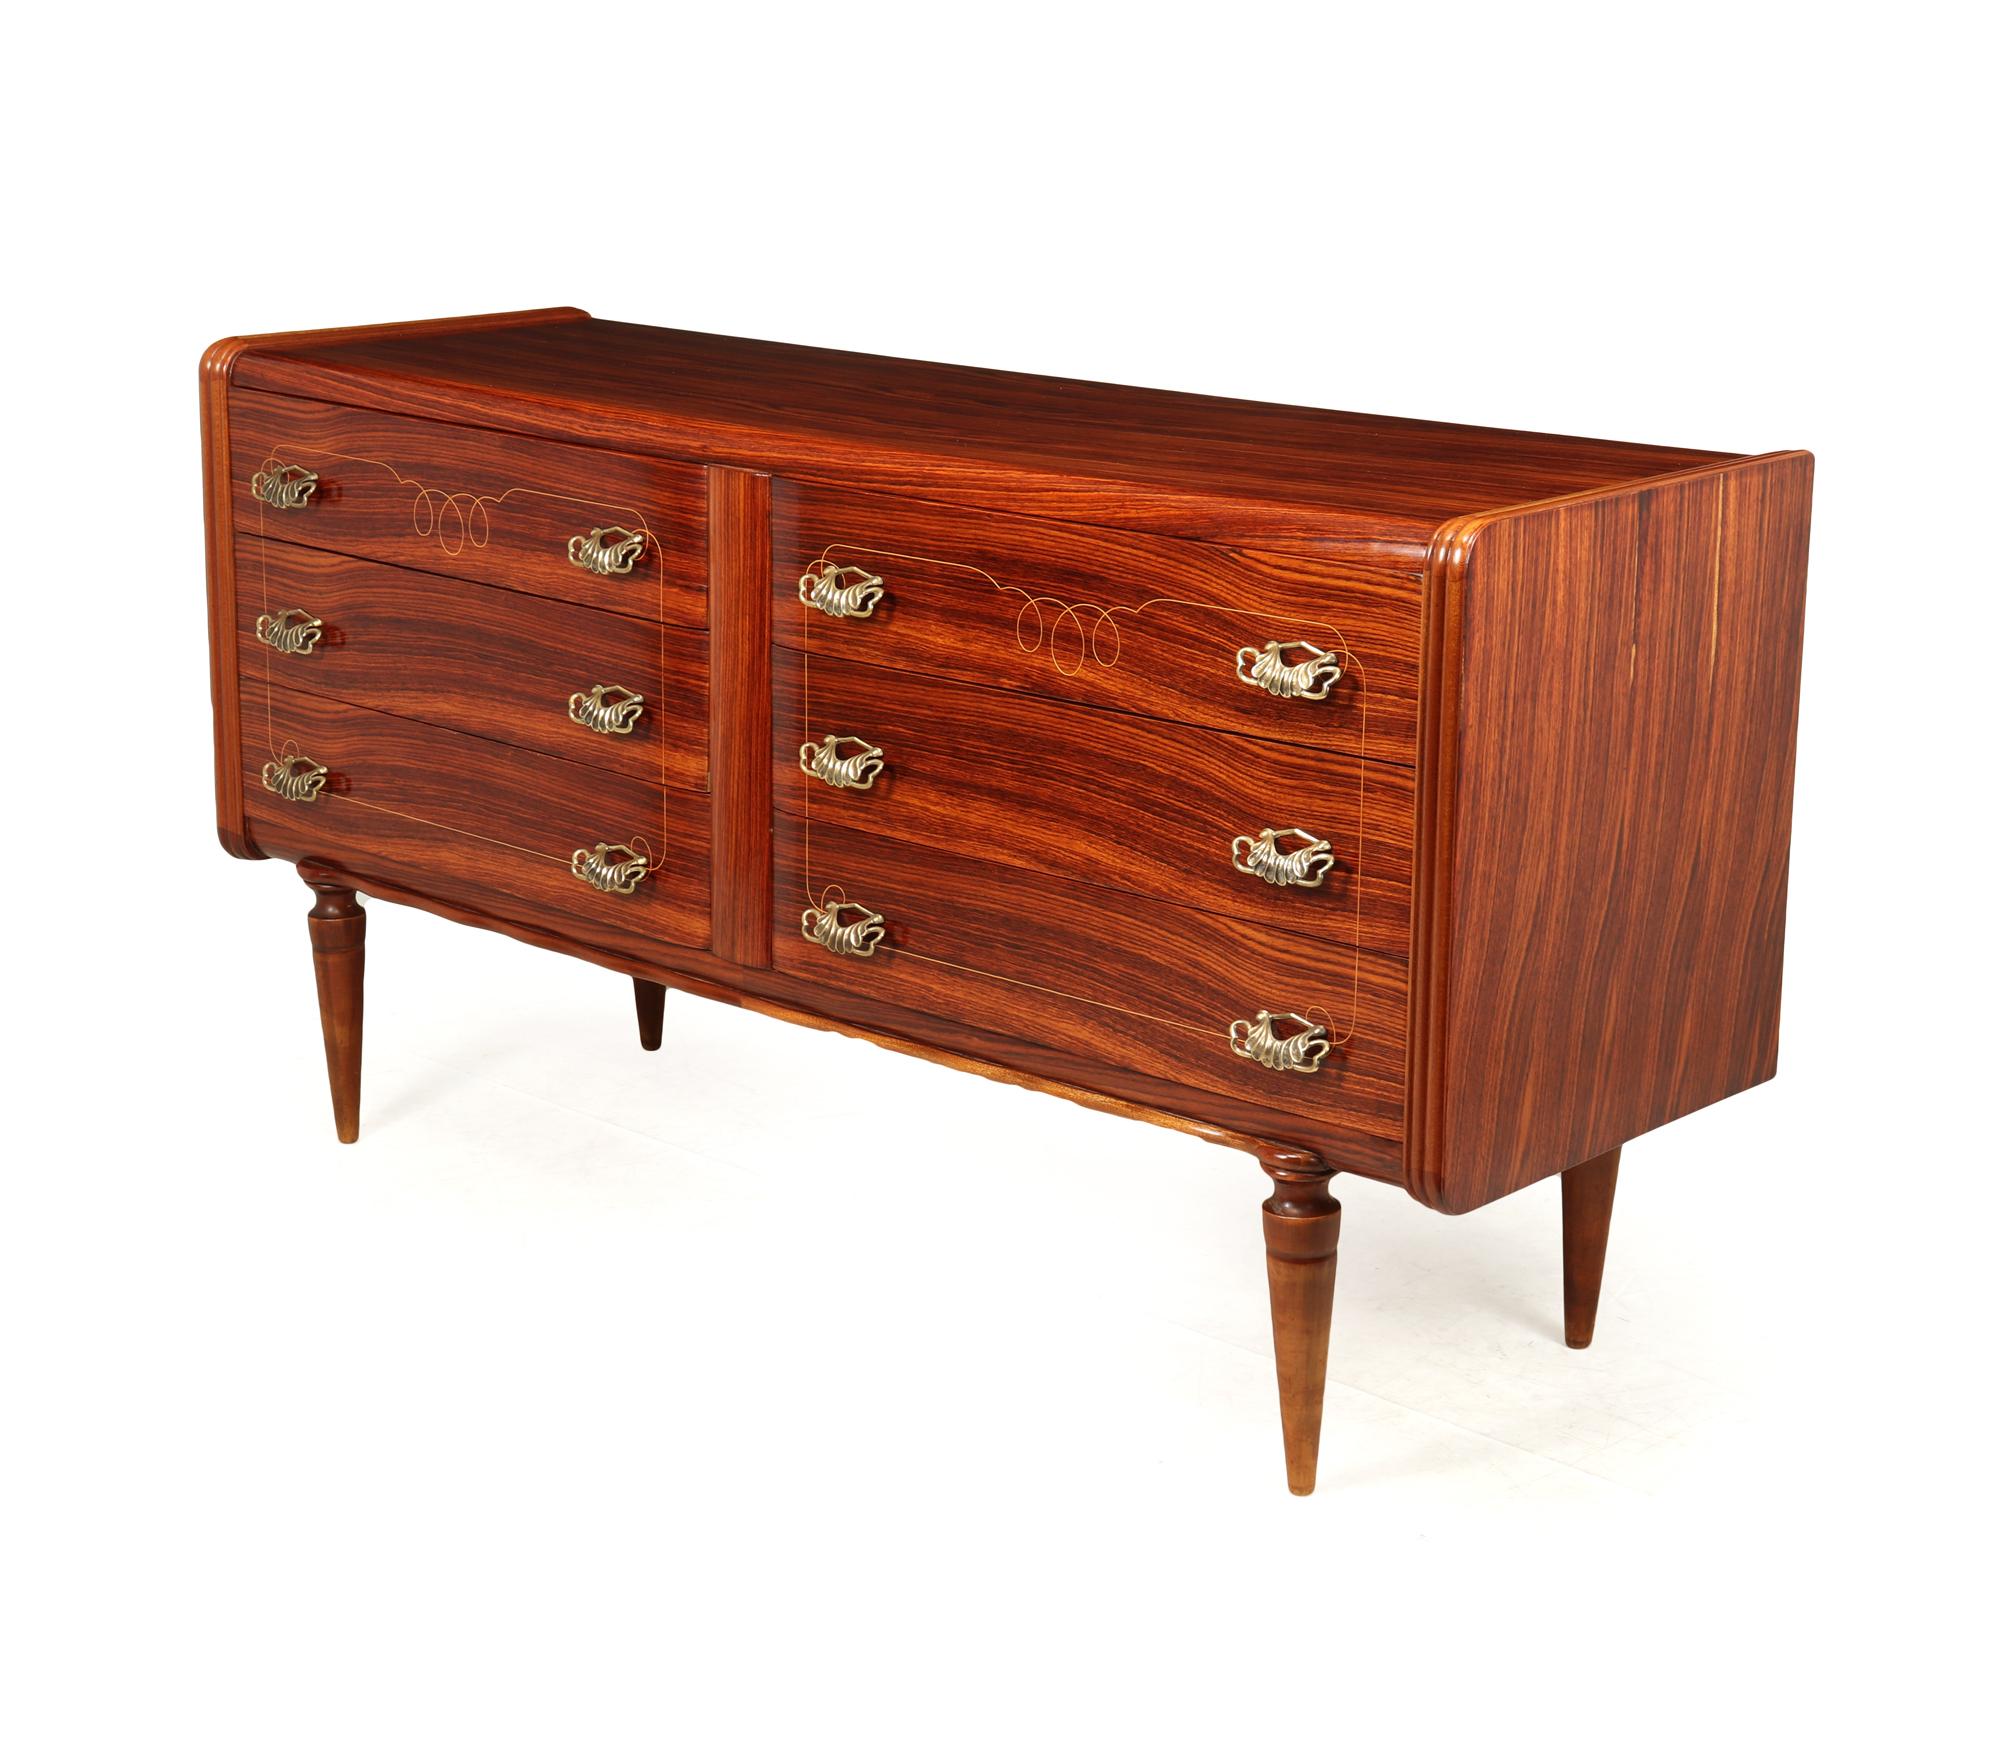 A Mid century six drawer chest produced by Dassi in Italy in the 1950’s, the chest stands very elegantly on four tapered turned legs and has two sets of three drawers with quality blonde linework inlay around the handles, these are very ornate and